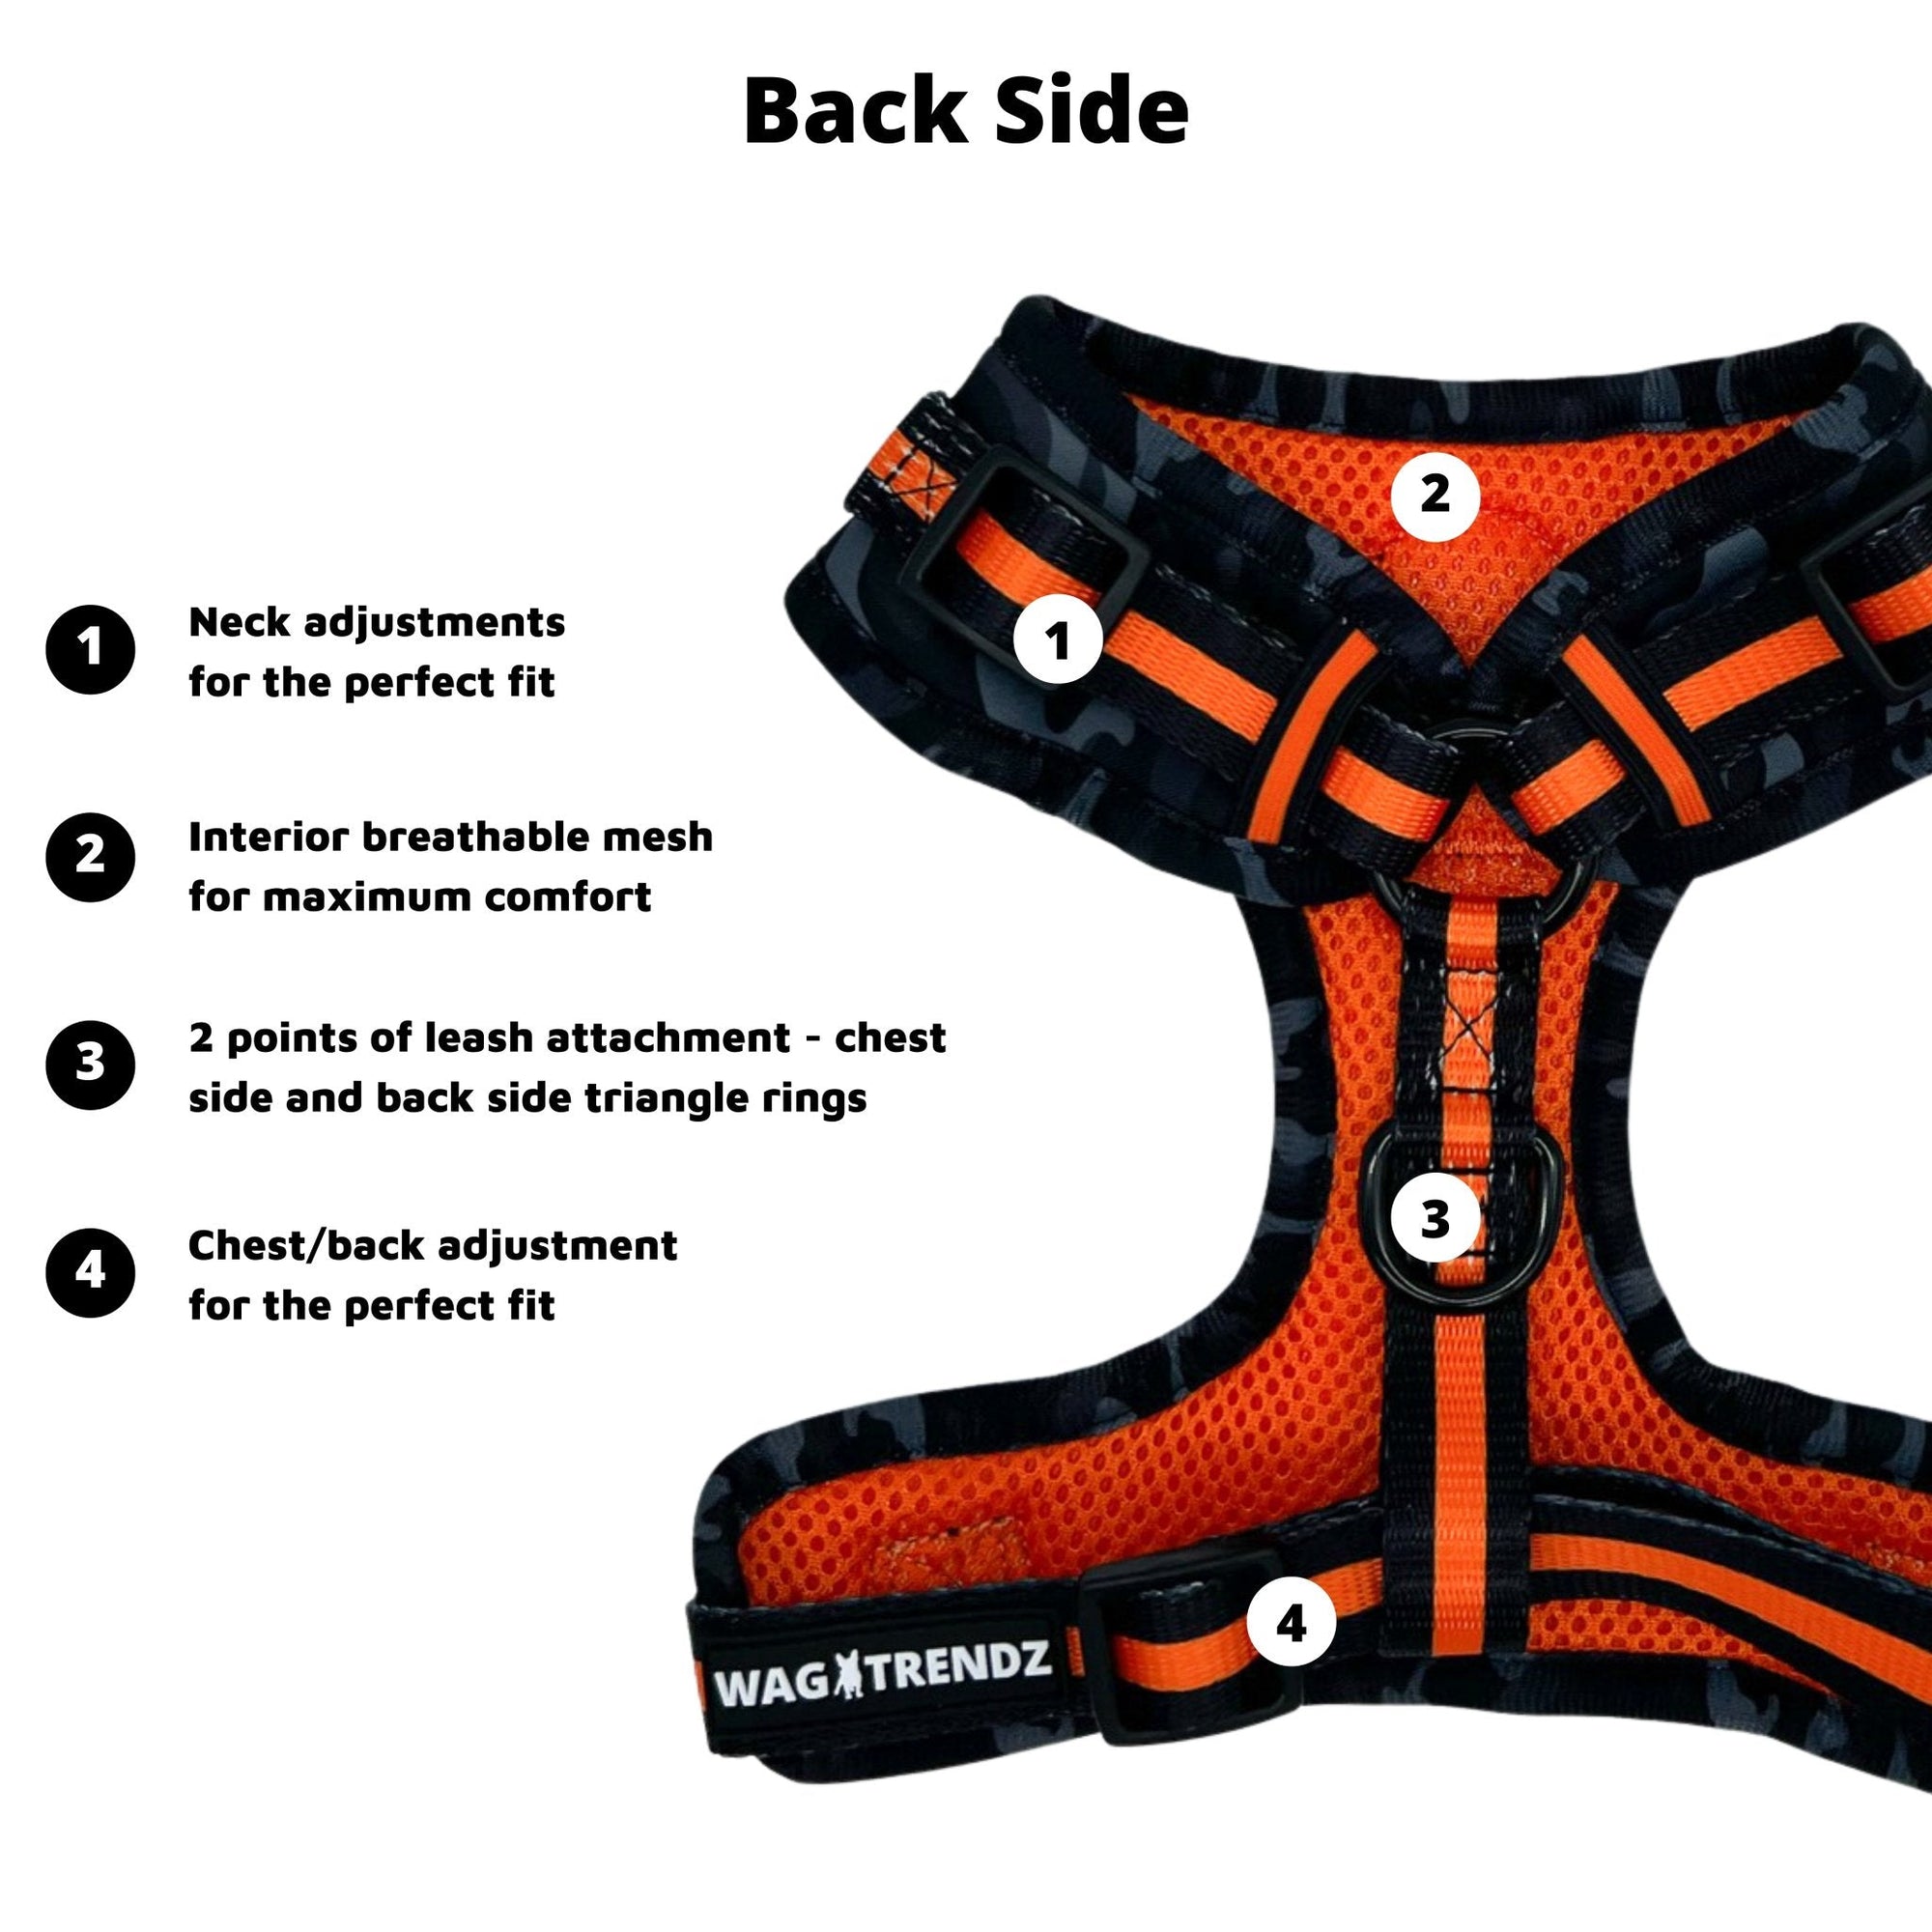 Dog Harness and Leash Set - Black &amp; Gray camo dog harness with Orange Accents - product feature captions - back side - against solid white background - Wag Trendz